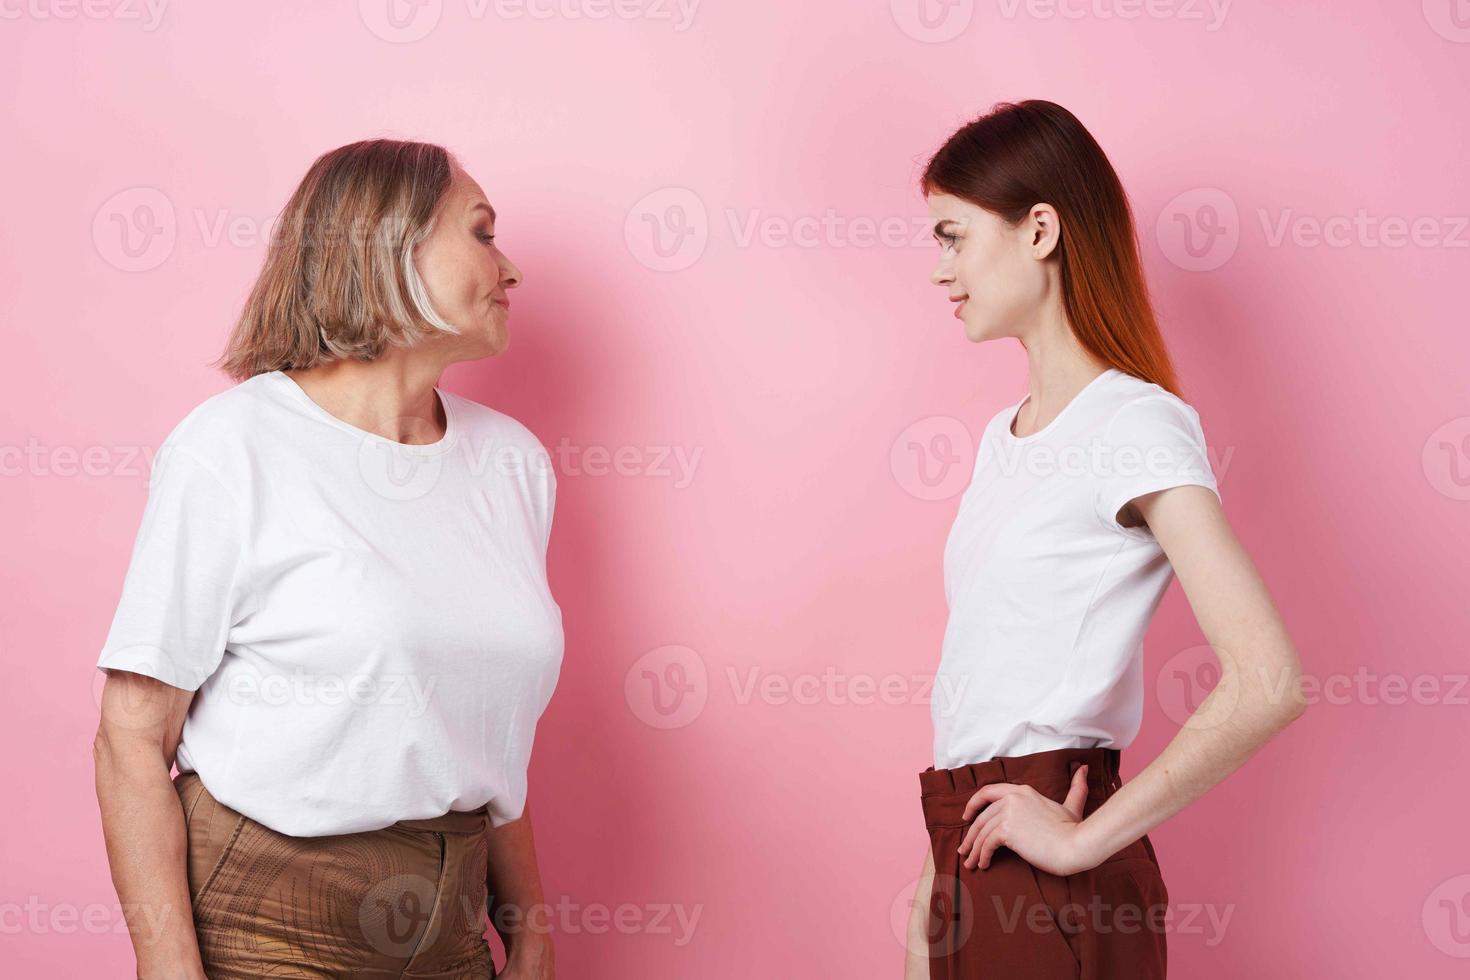 grandmother and granddaughter are standing side by side family friendship fun pink background photo